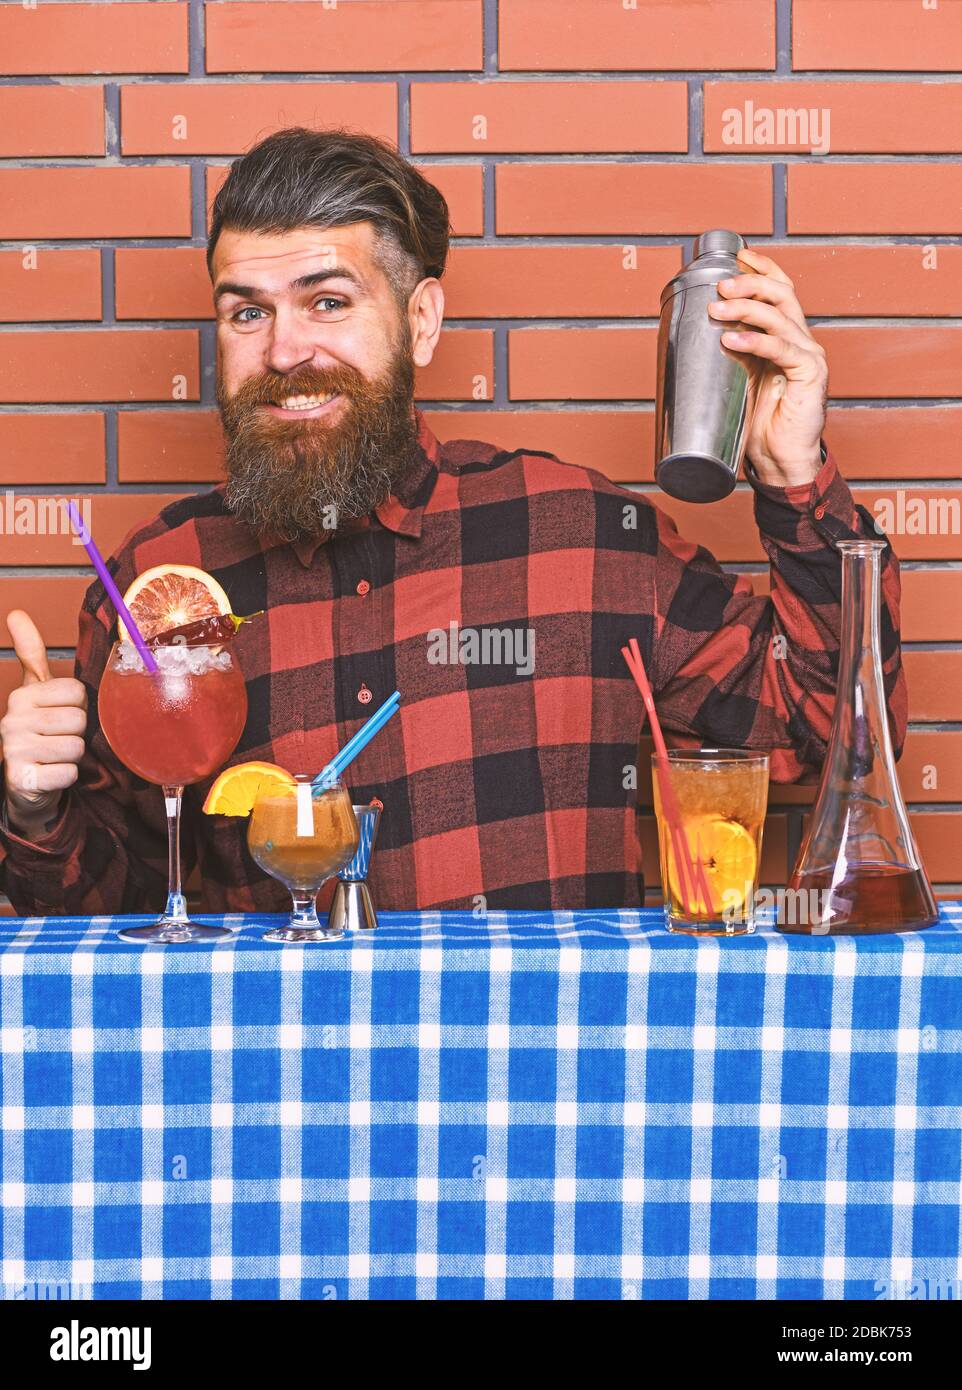 Alcoholic drinks concept. Man in checkered shirt on brick wall background prepares drinks. Barman with long beard and mustache and stylish hair on happy face holding shaker, makes alcoholic cocktail. Stock Photo